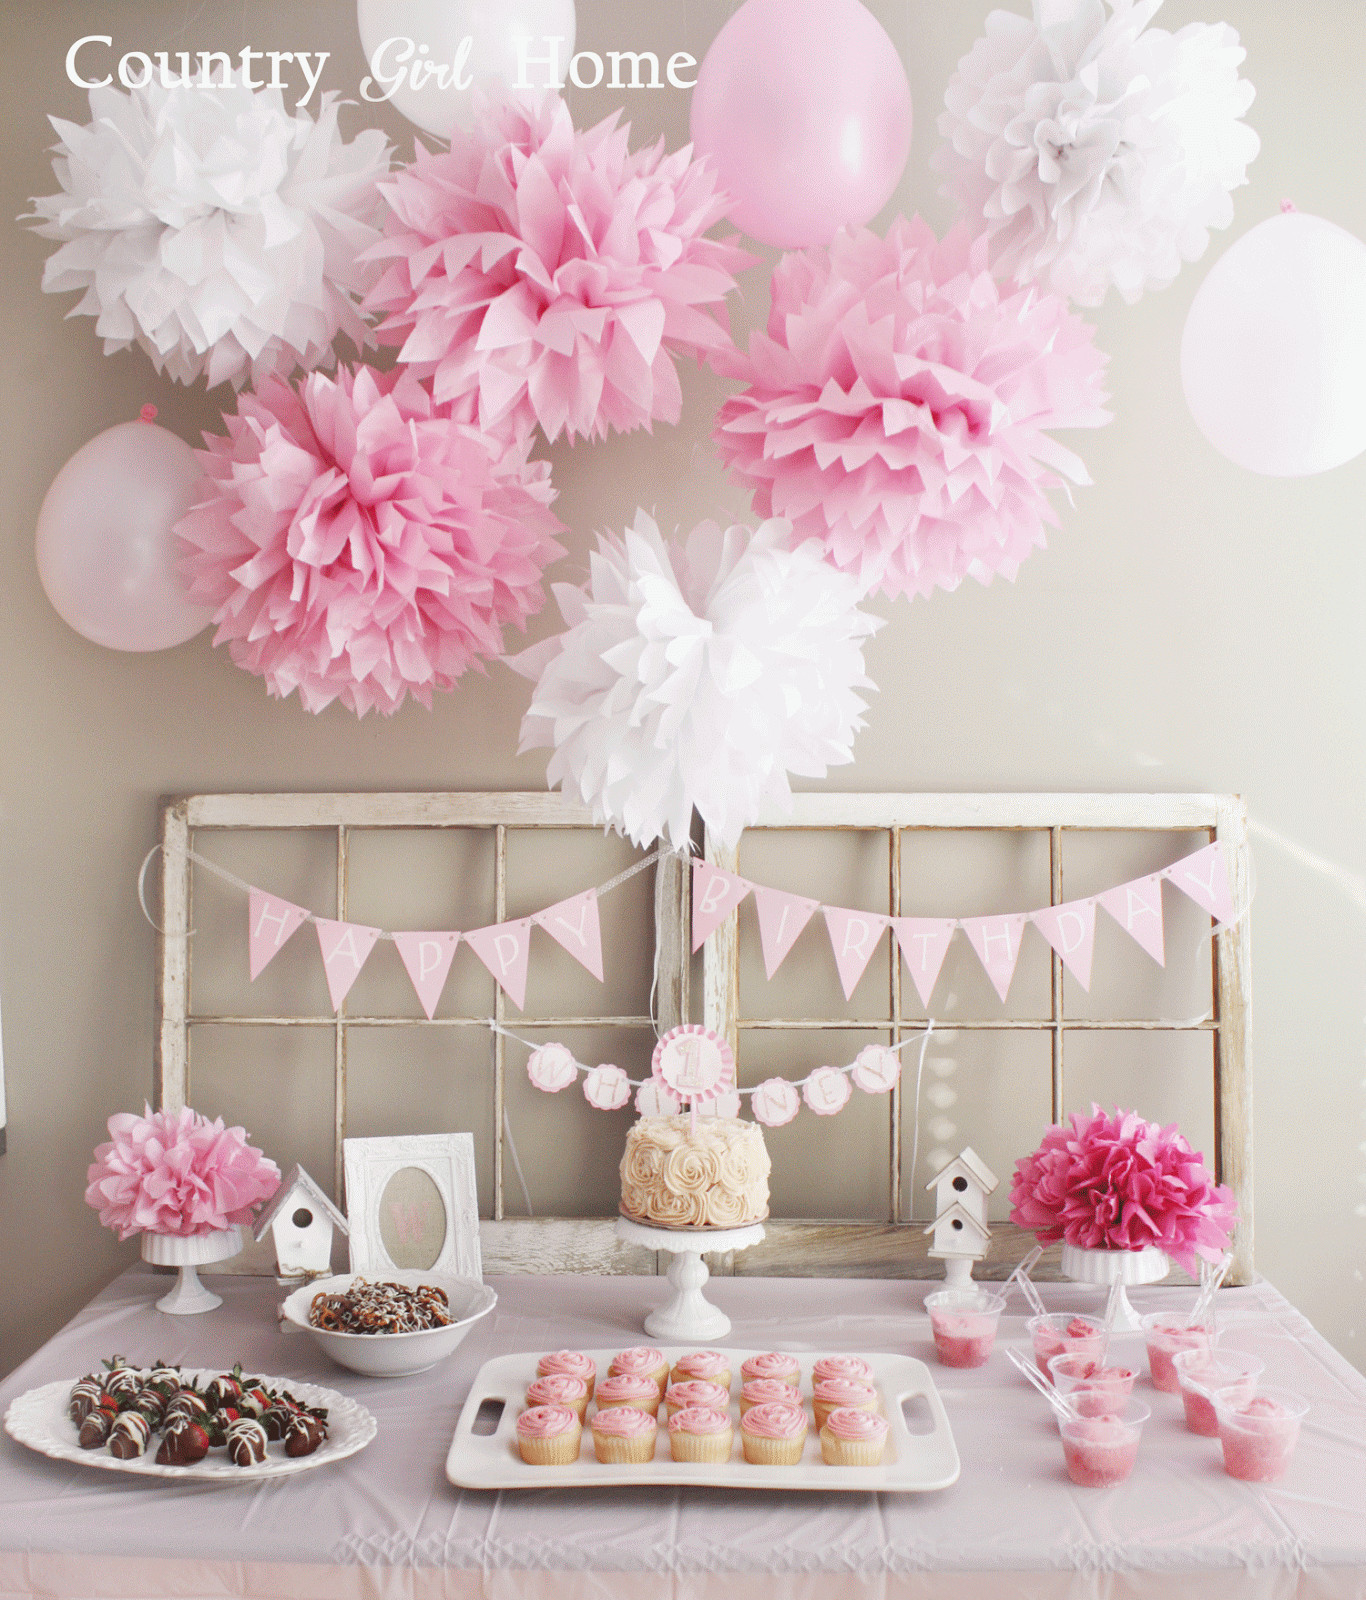 First Birthday Decoration Ideas
 COUNTRY GIRL HOME 1st Birthday